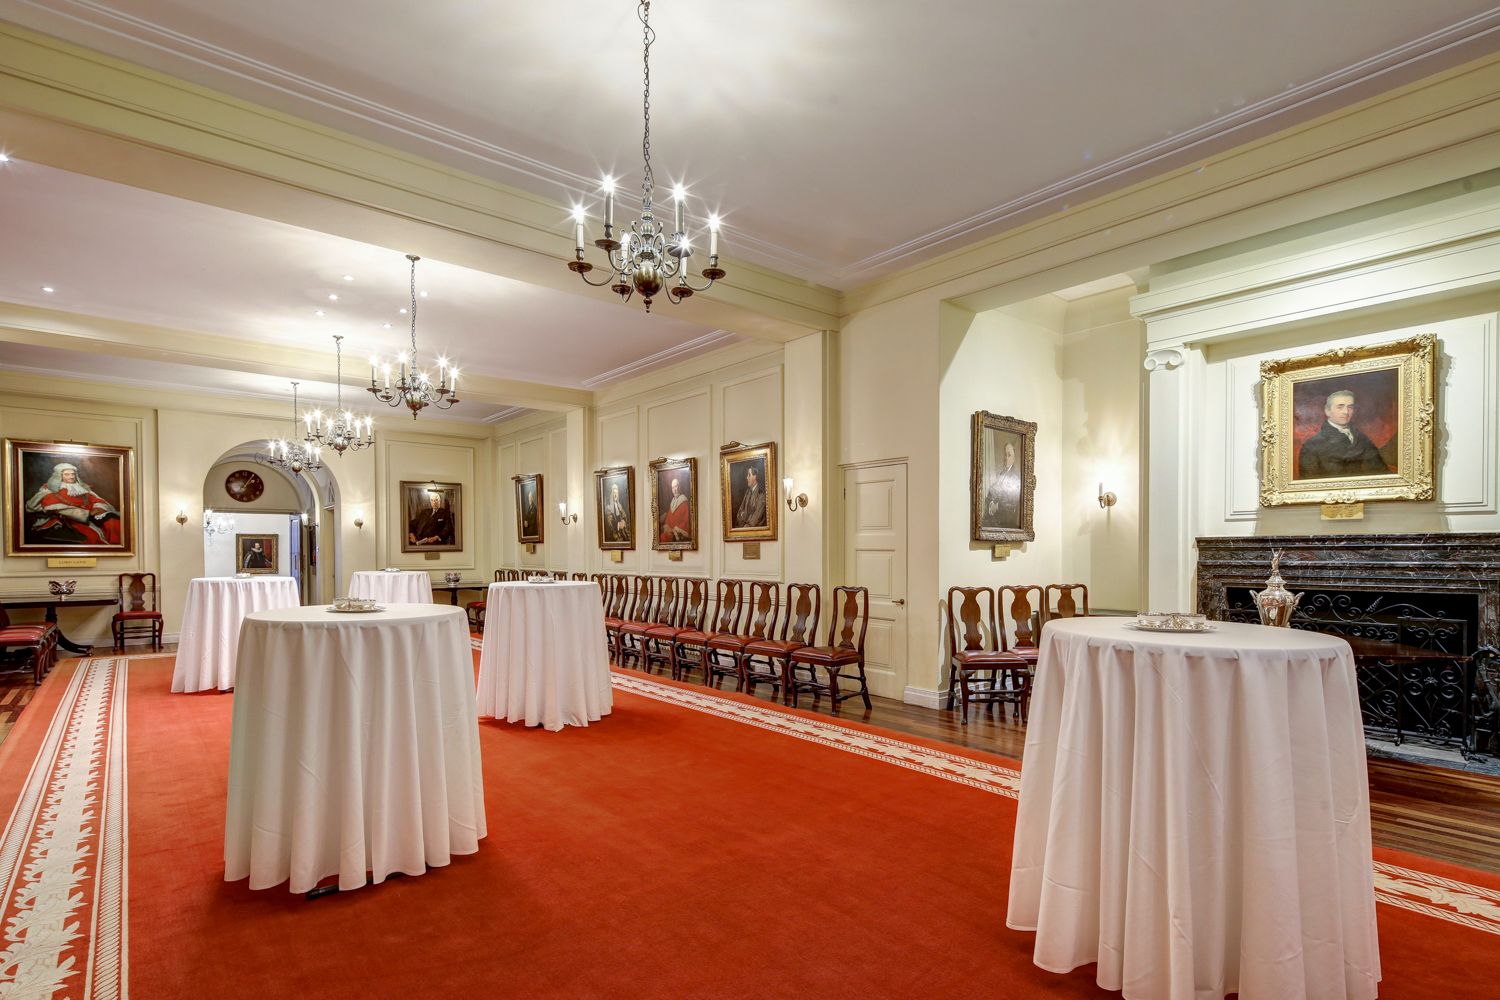 Private parties at London event venue The Gray's Inn Venue